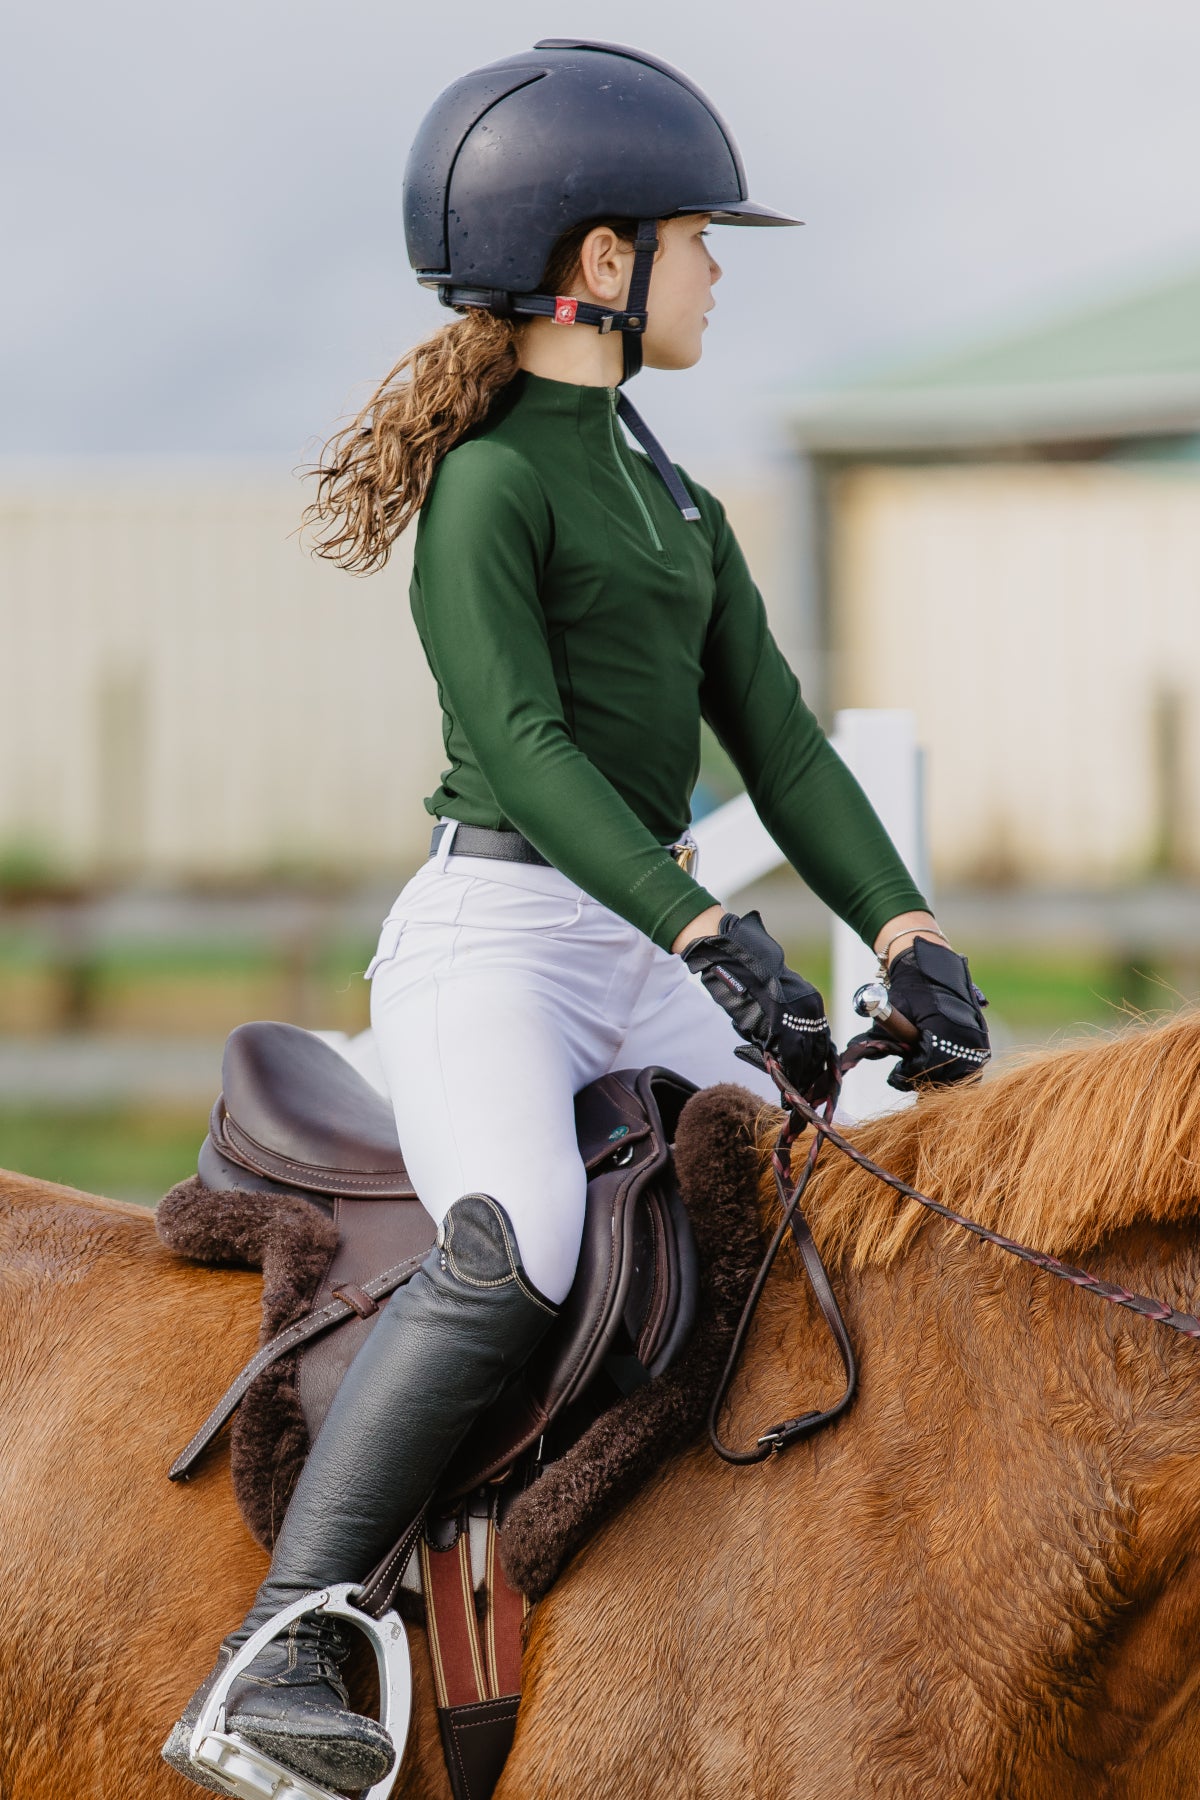 Young Rider by Saddle & Canter. Equestrian Clothing for Children